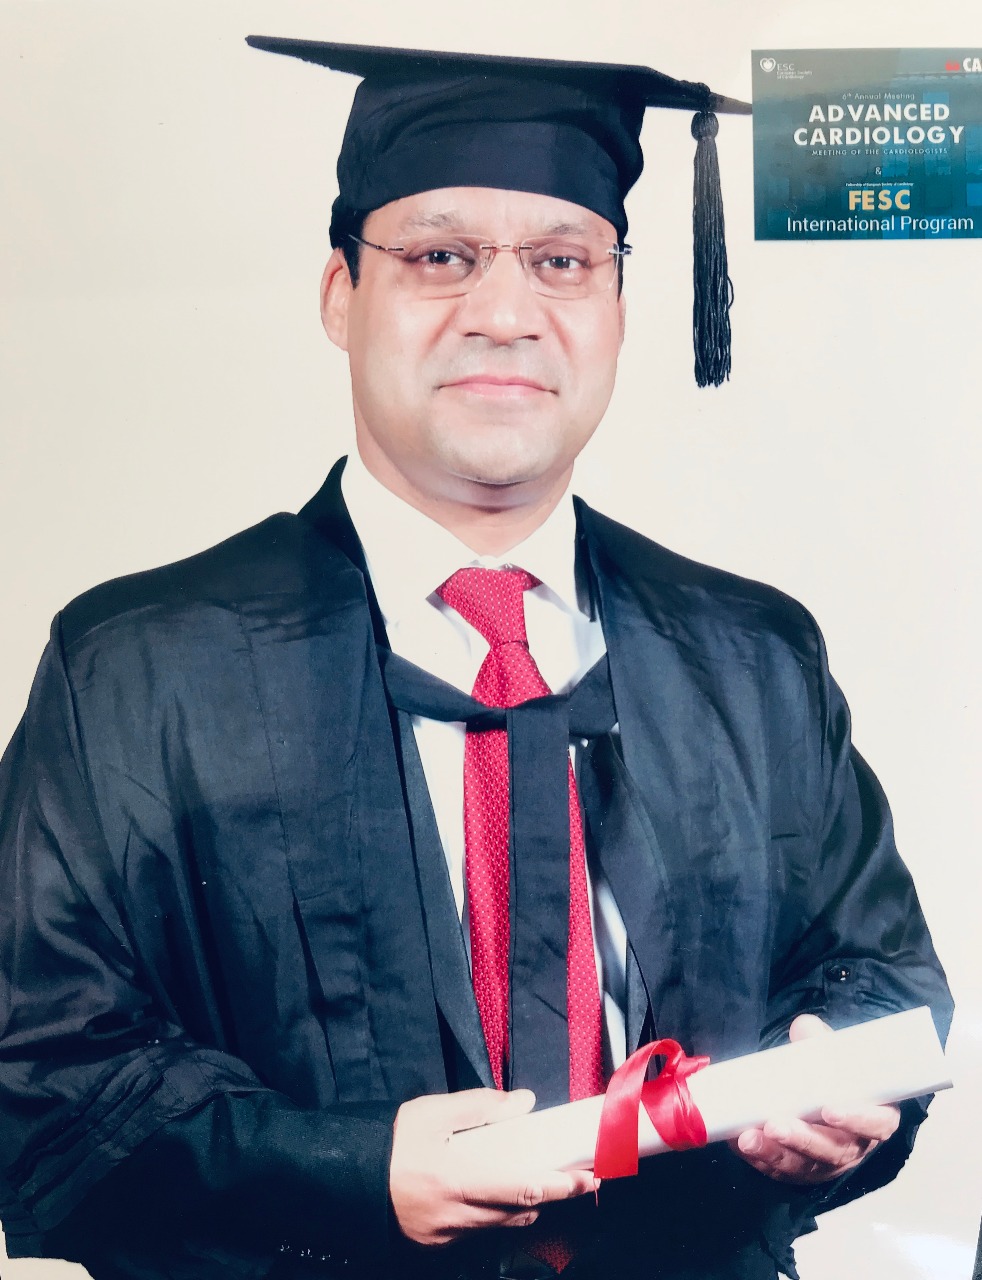 European Society's Fellowship to Dr Khandelwal,